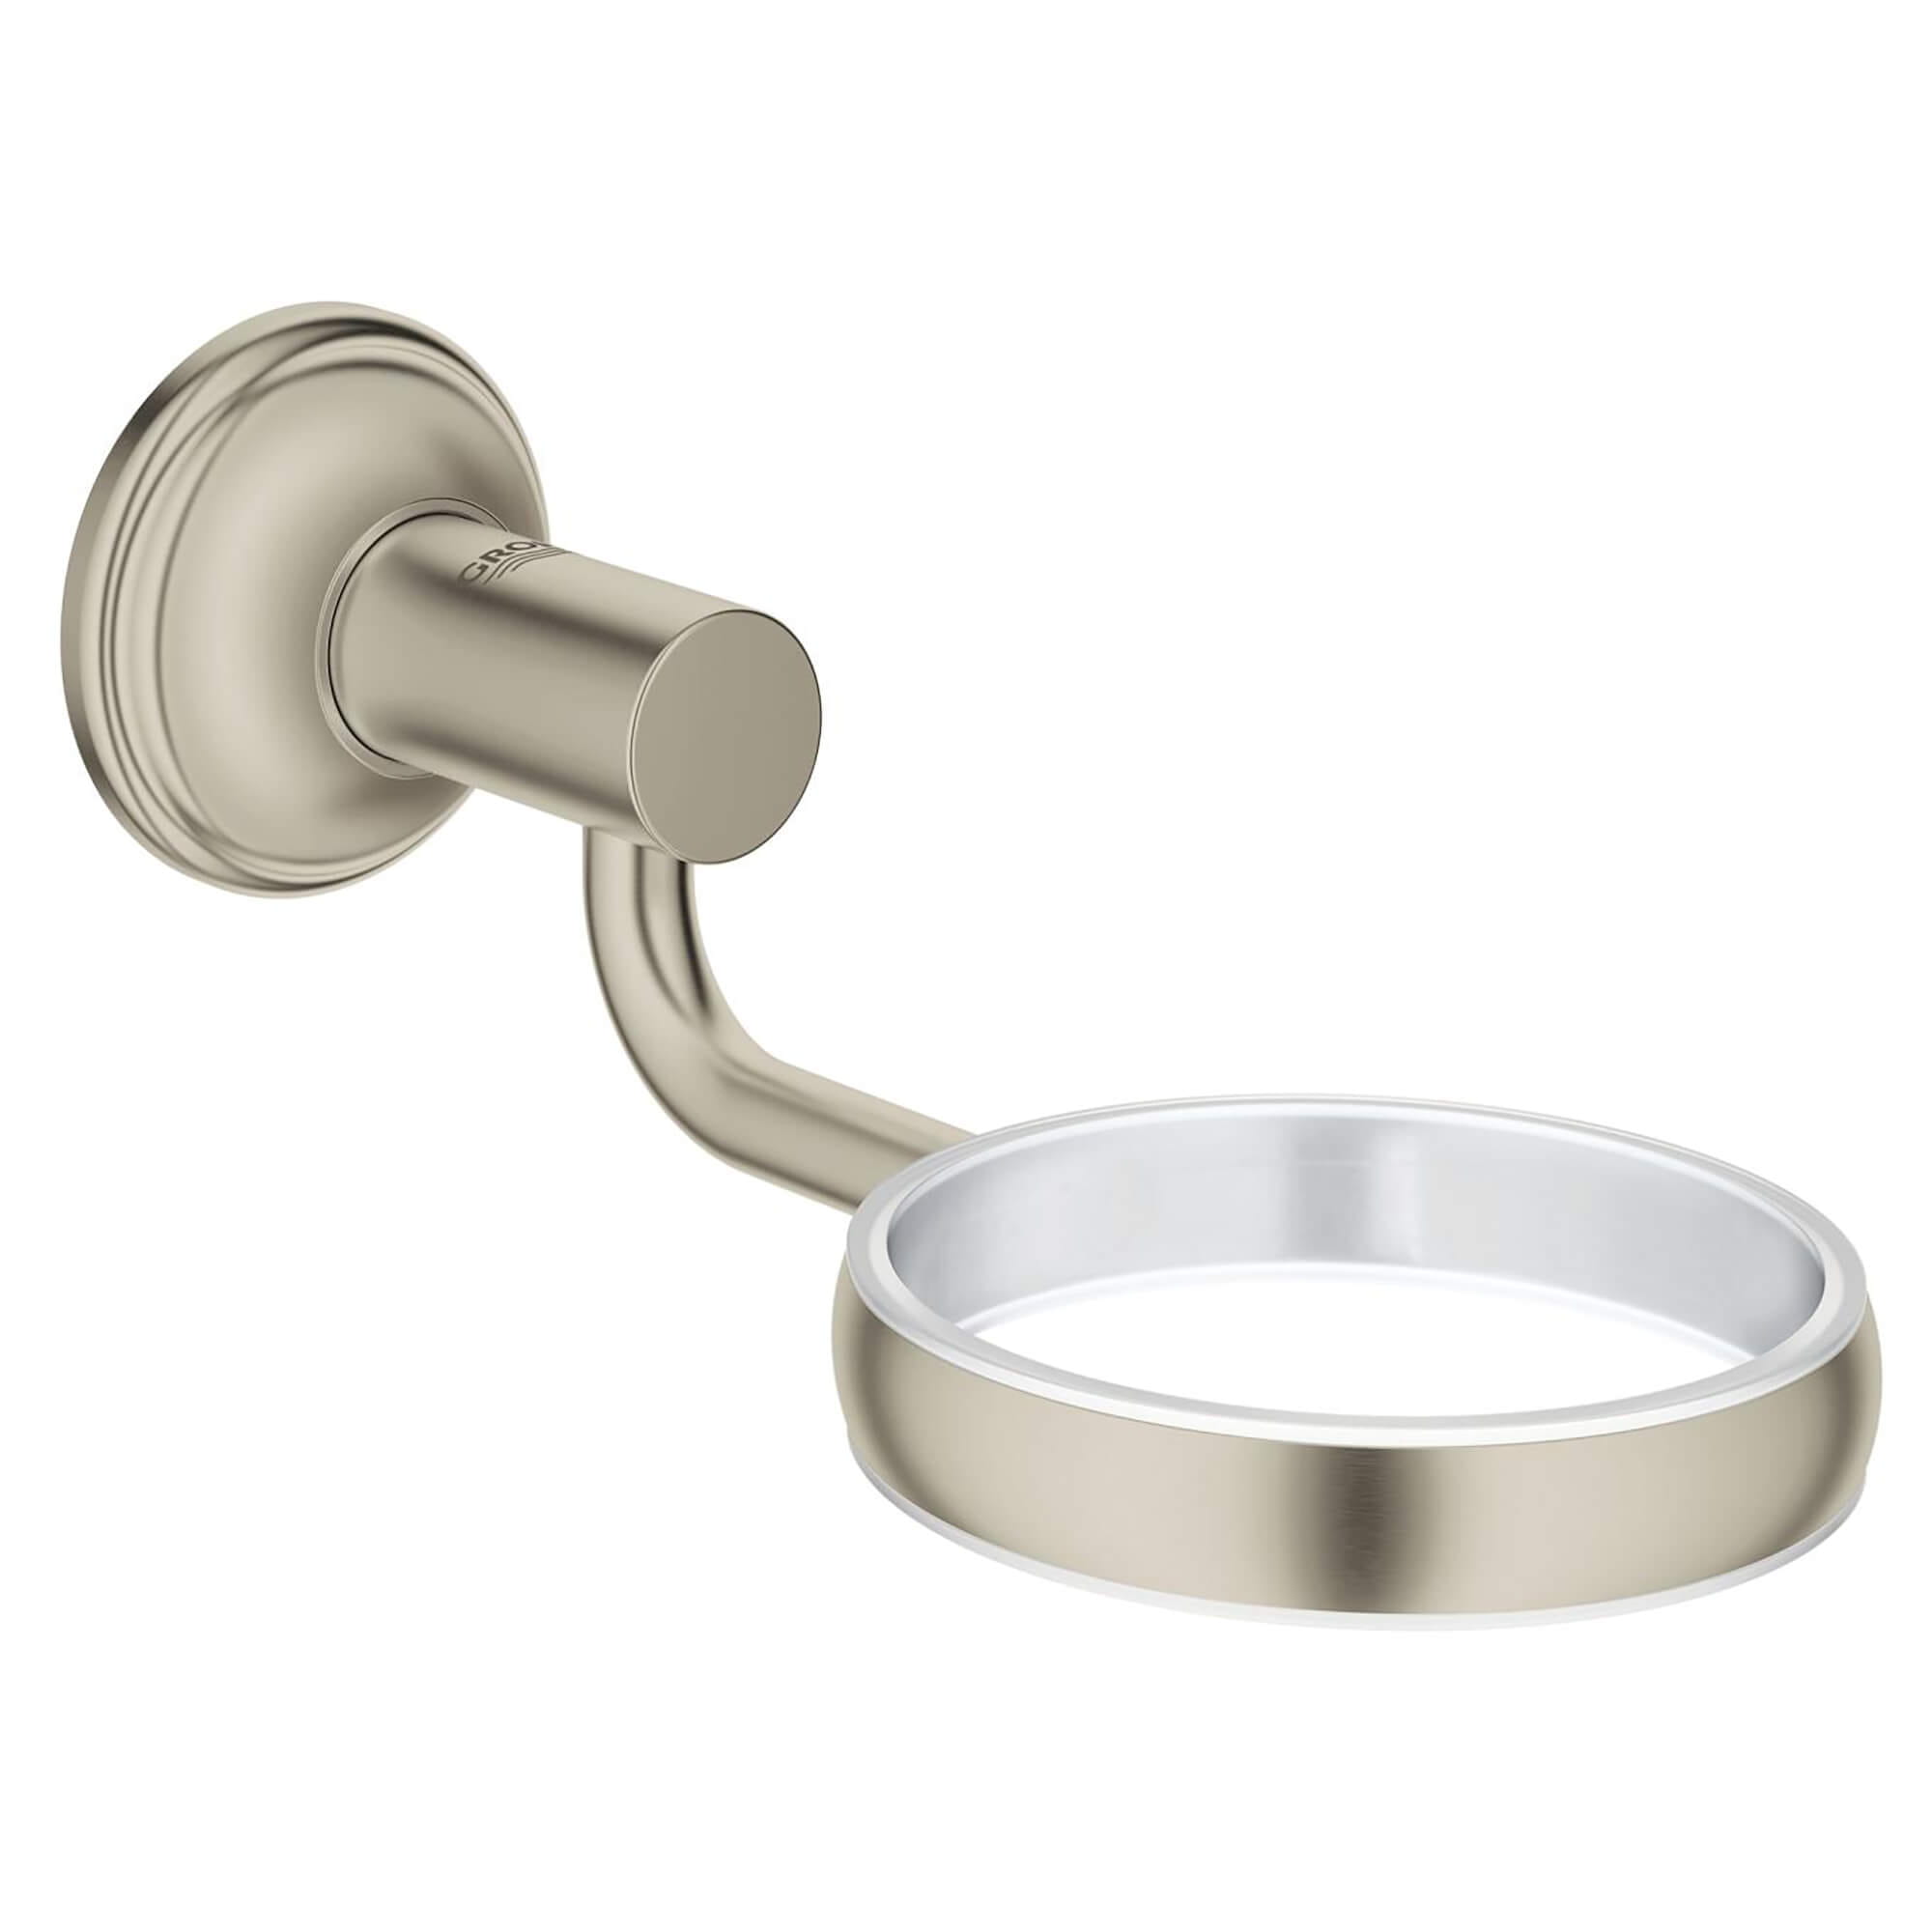 Essentials Authentic Soap Holder GROHE BRUSHED NICKEL